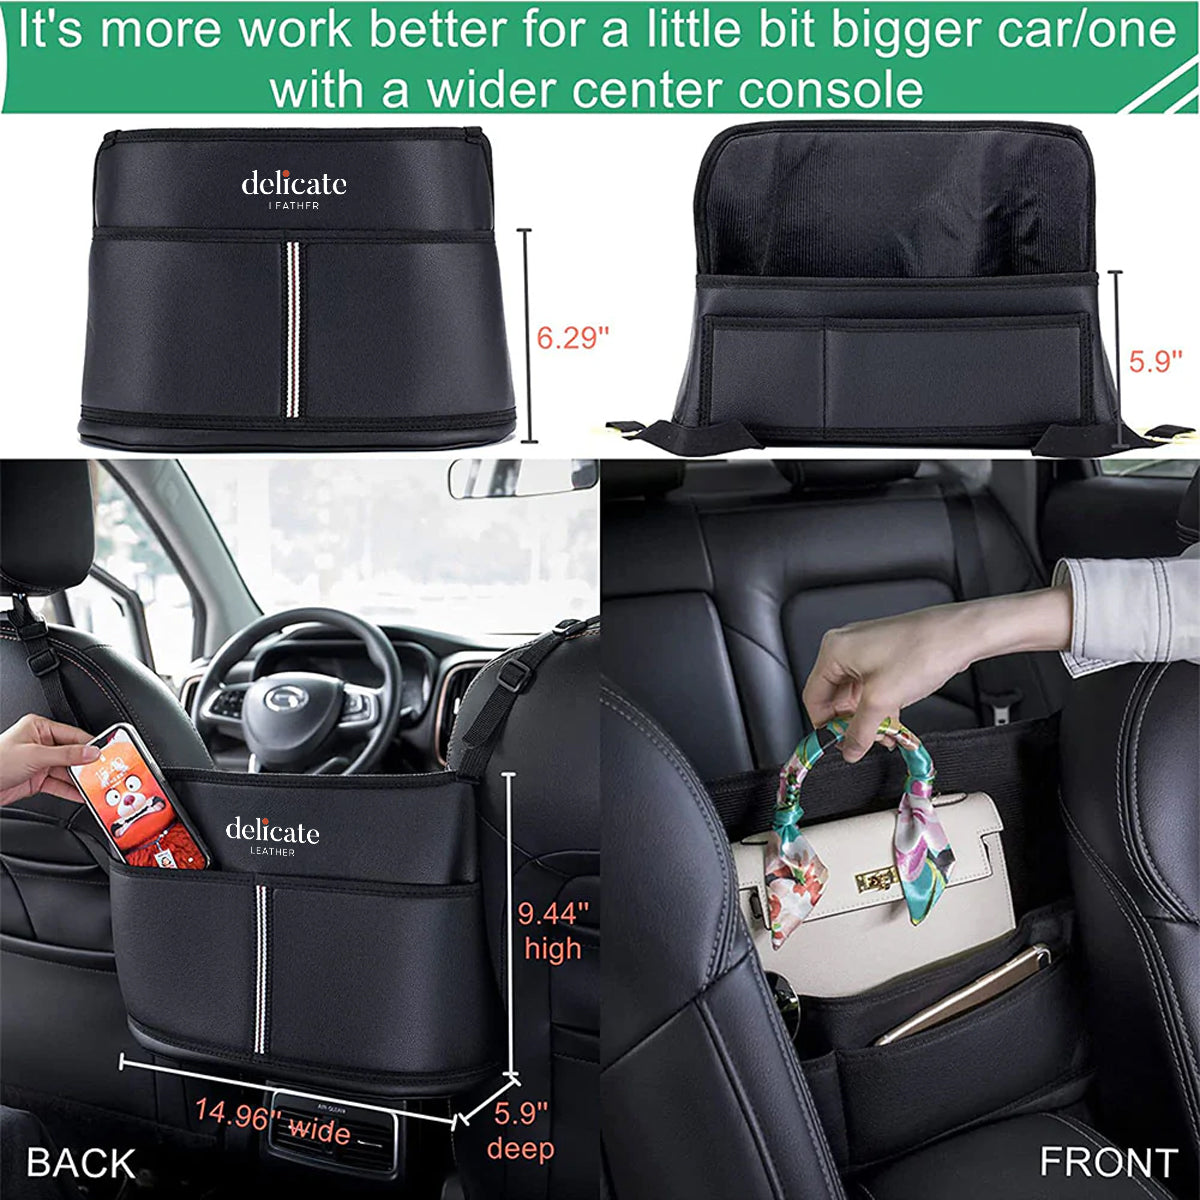 Delicate Leather Car Purse Holder for Car Handbag Holder Between Seats Premium PU Leather, Custom Fit For Your Cars, Auto Driver Or Passenger Accessories Organizer, Hanging Car Purse Storage Pocket Back Seat Pet Barrier CC11991 - Delicate Leather